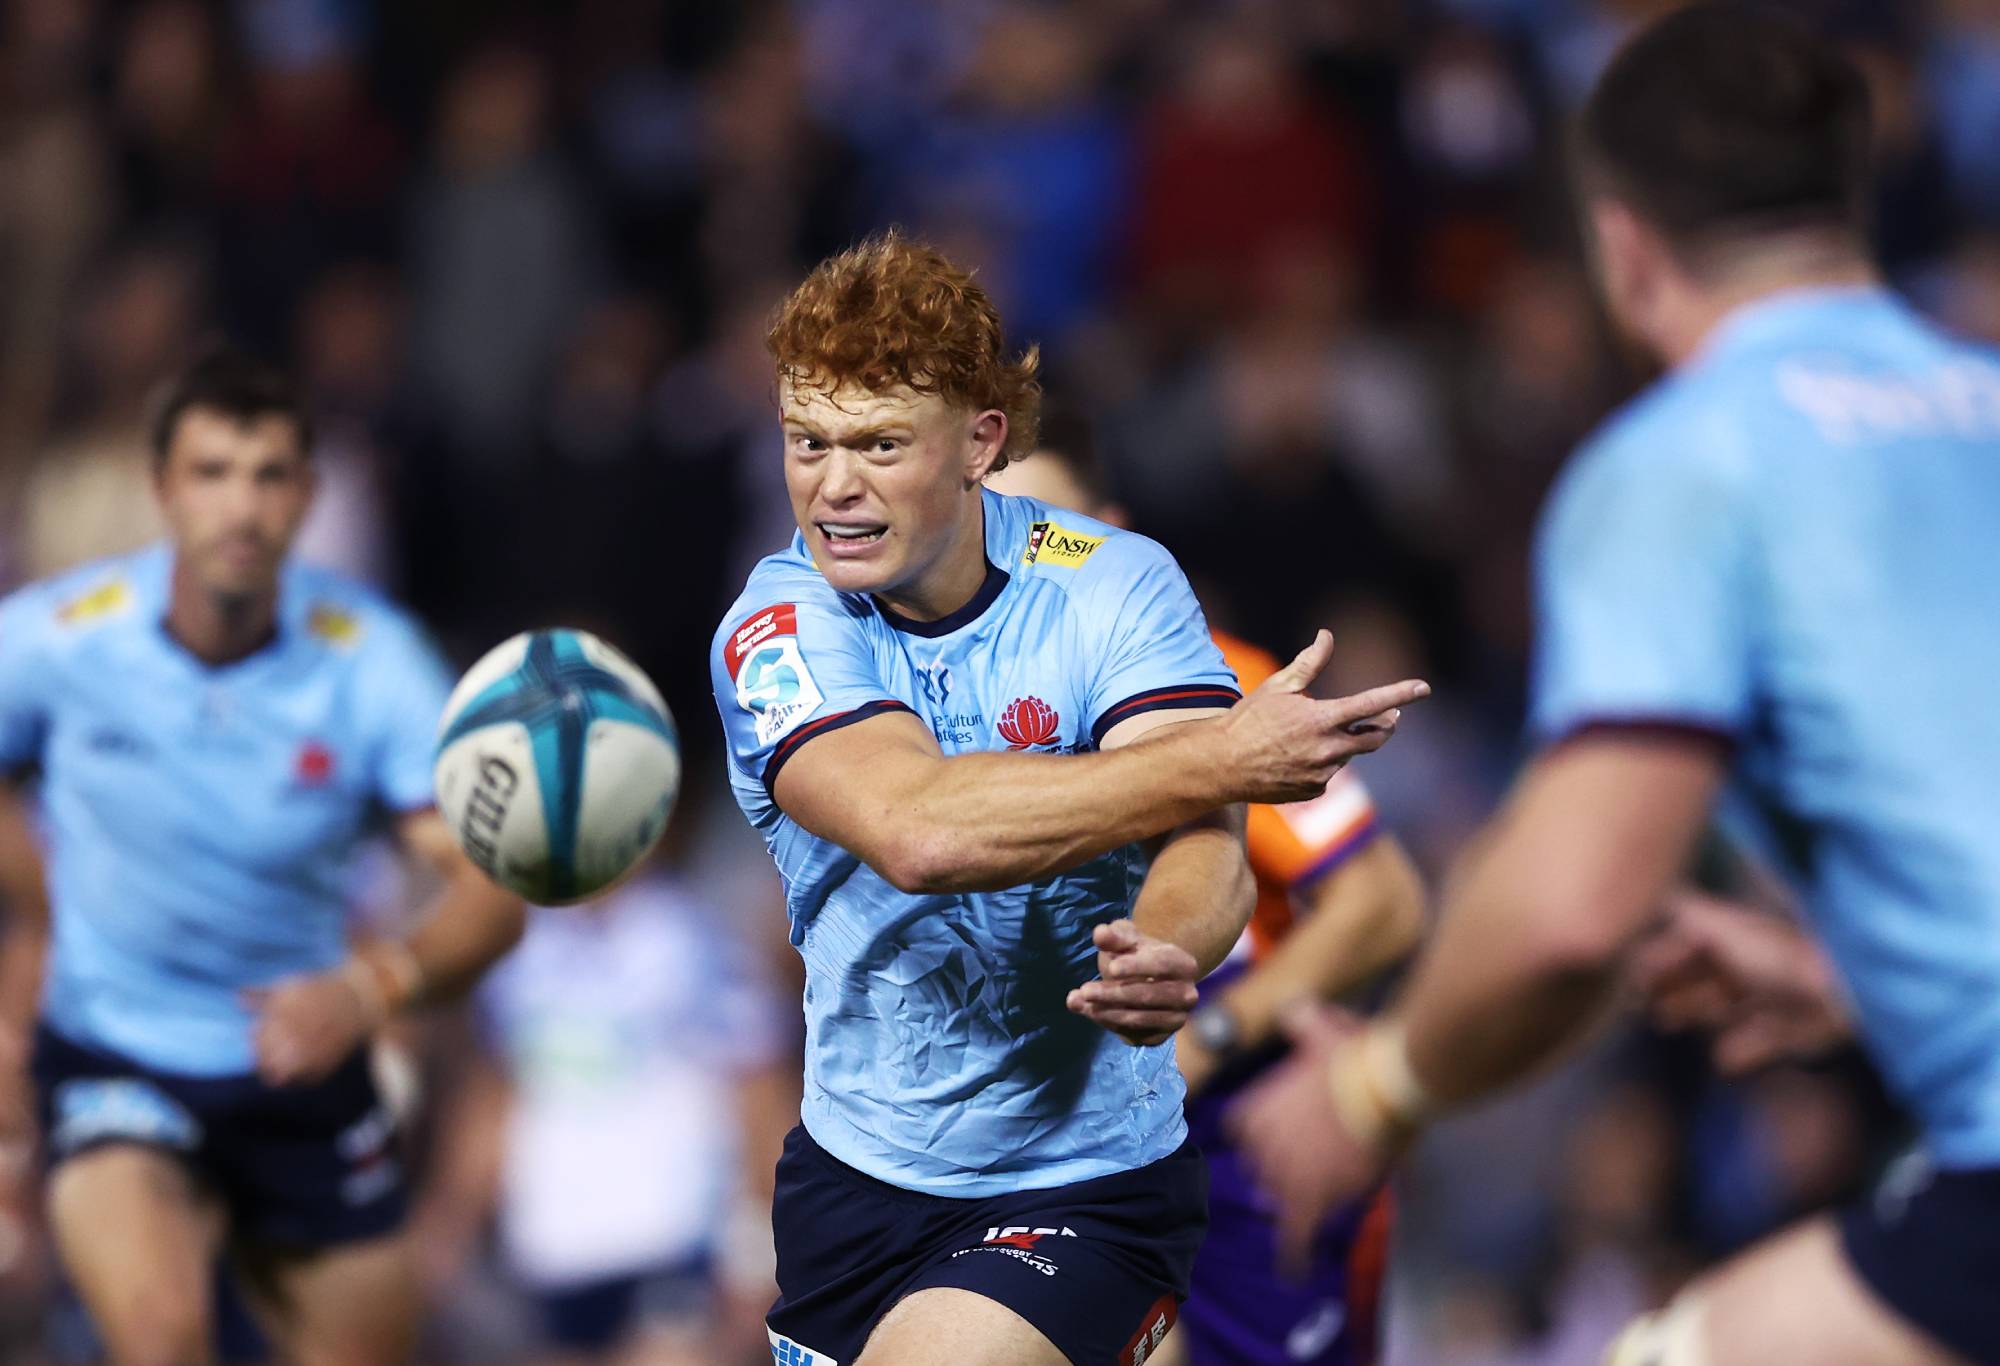 Tane Edmed of the Waratahs passes during the round 15 Super Rugby Pacific match between the NSW Waratahs and the Blues at Leichhardt Oval on May 28, 2022 in Sydney, Australia. (Photo by Matt King/Getty Images)